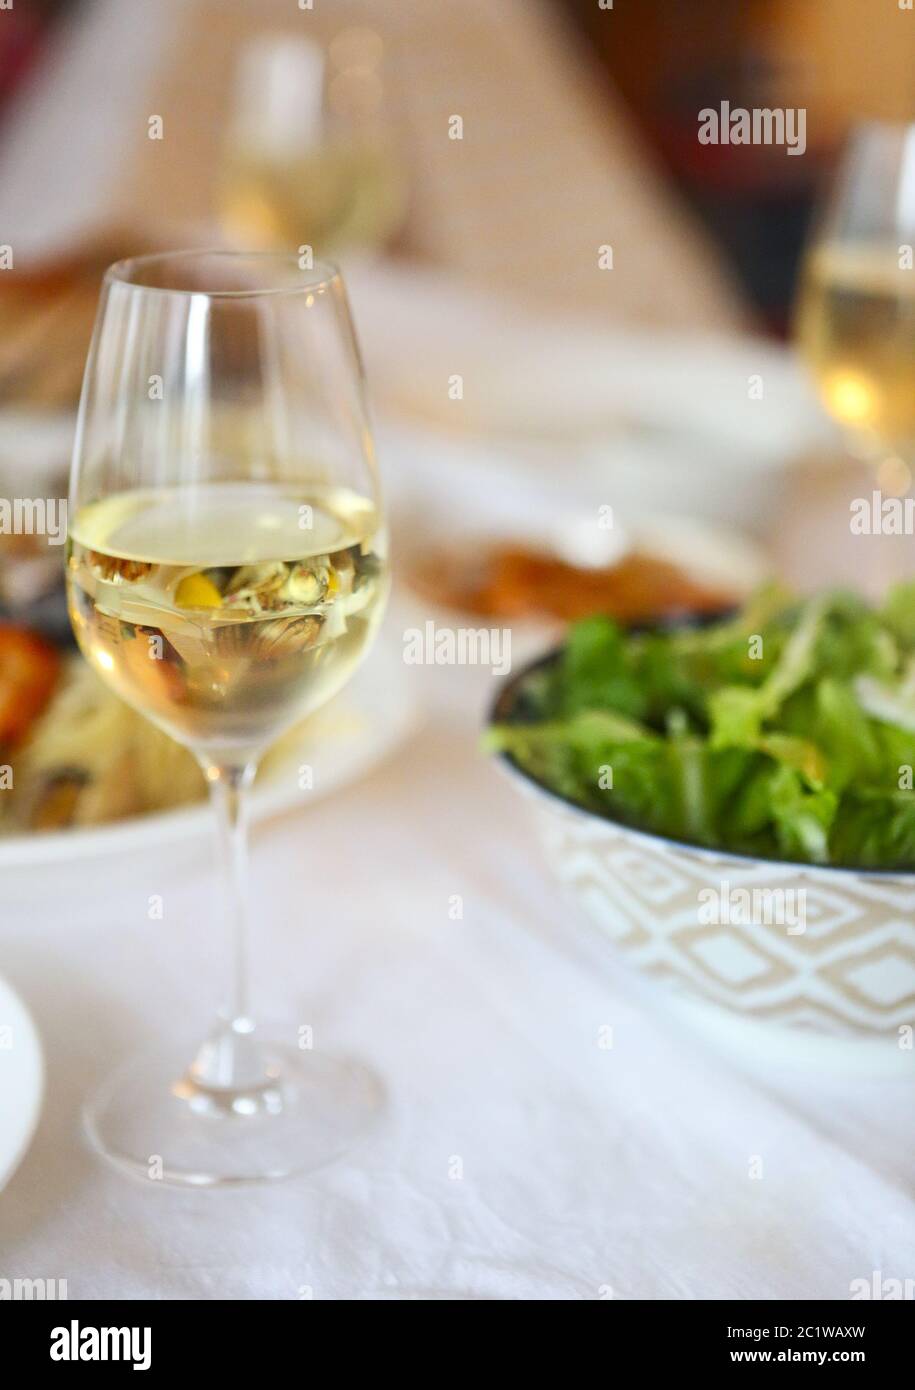 People fine dining seafood and white wine Stock Photo